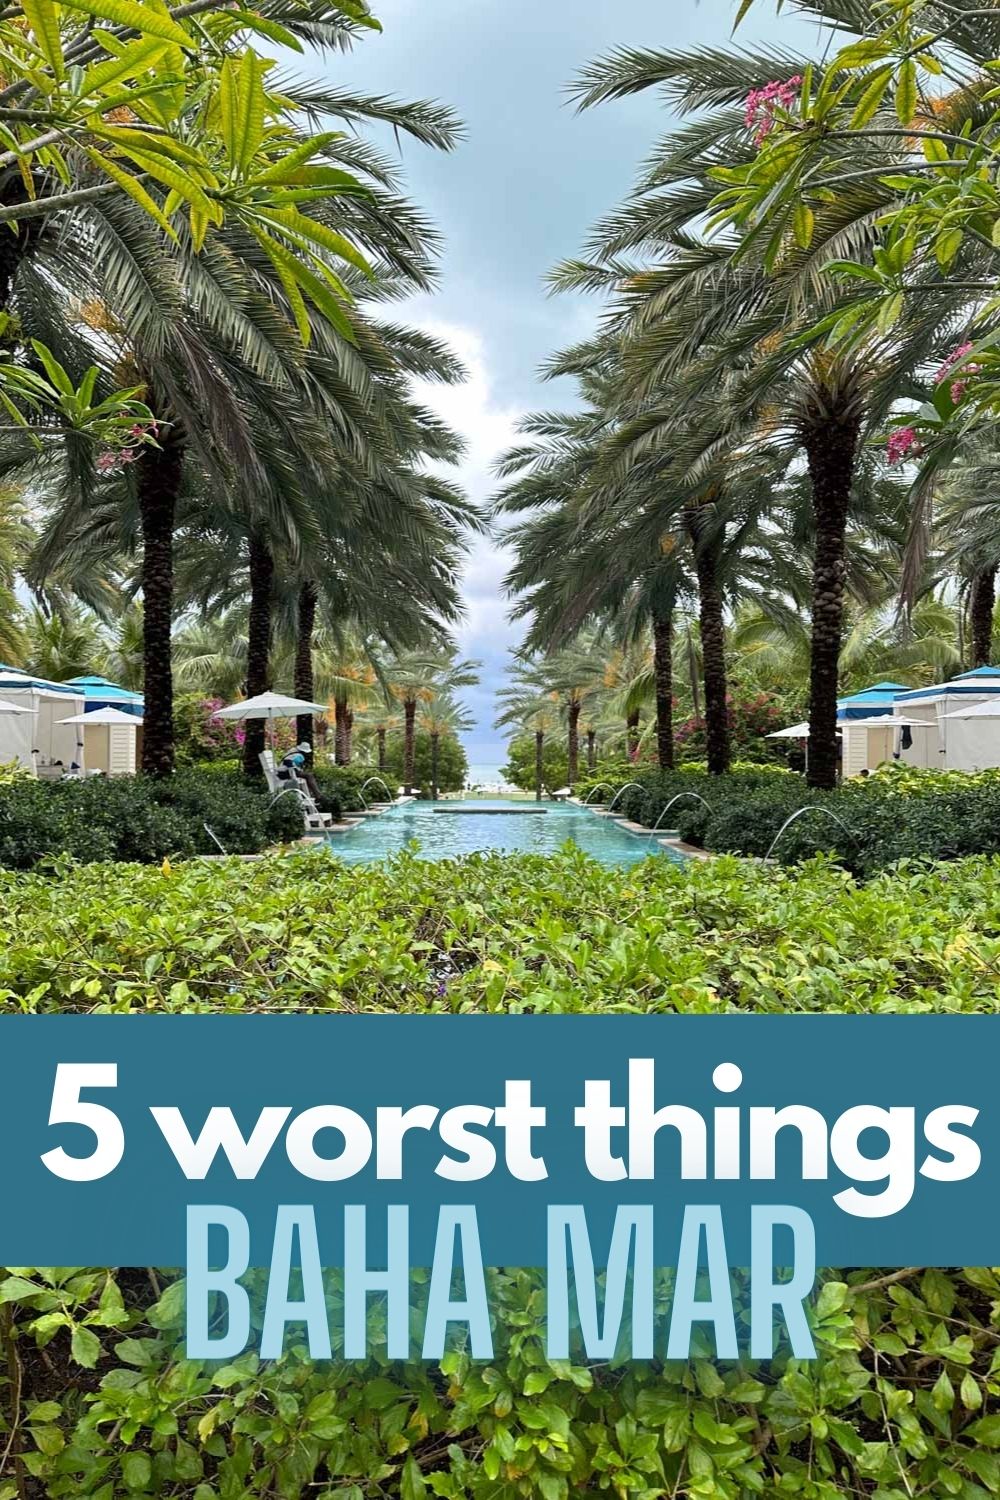 5 worst things about baha mar, is baha mar worth it?